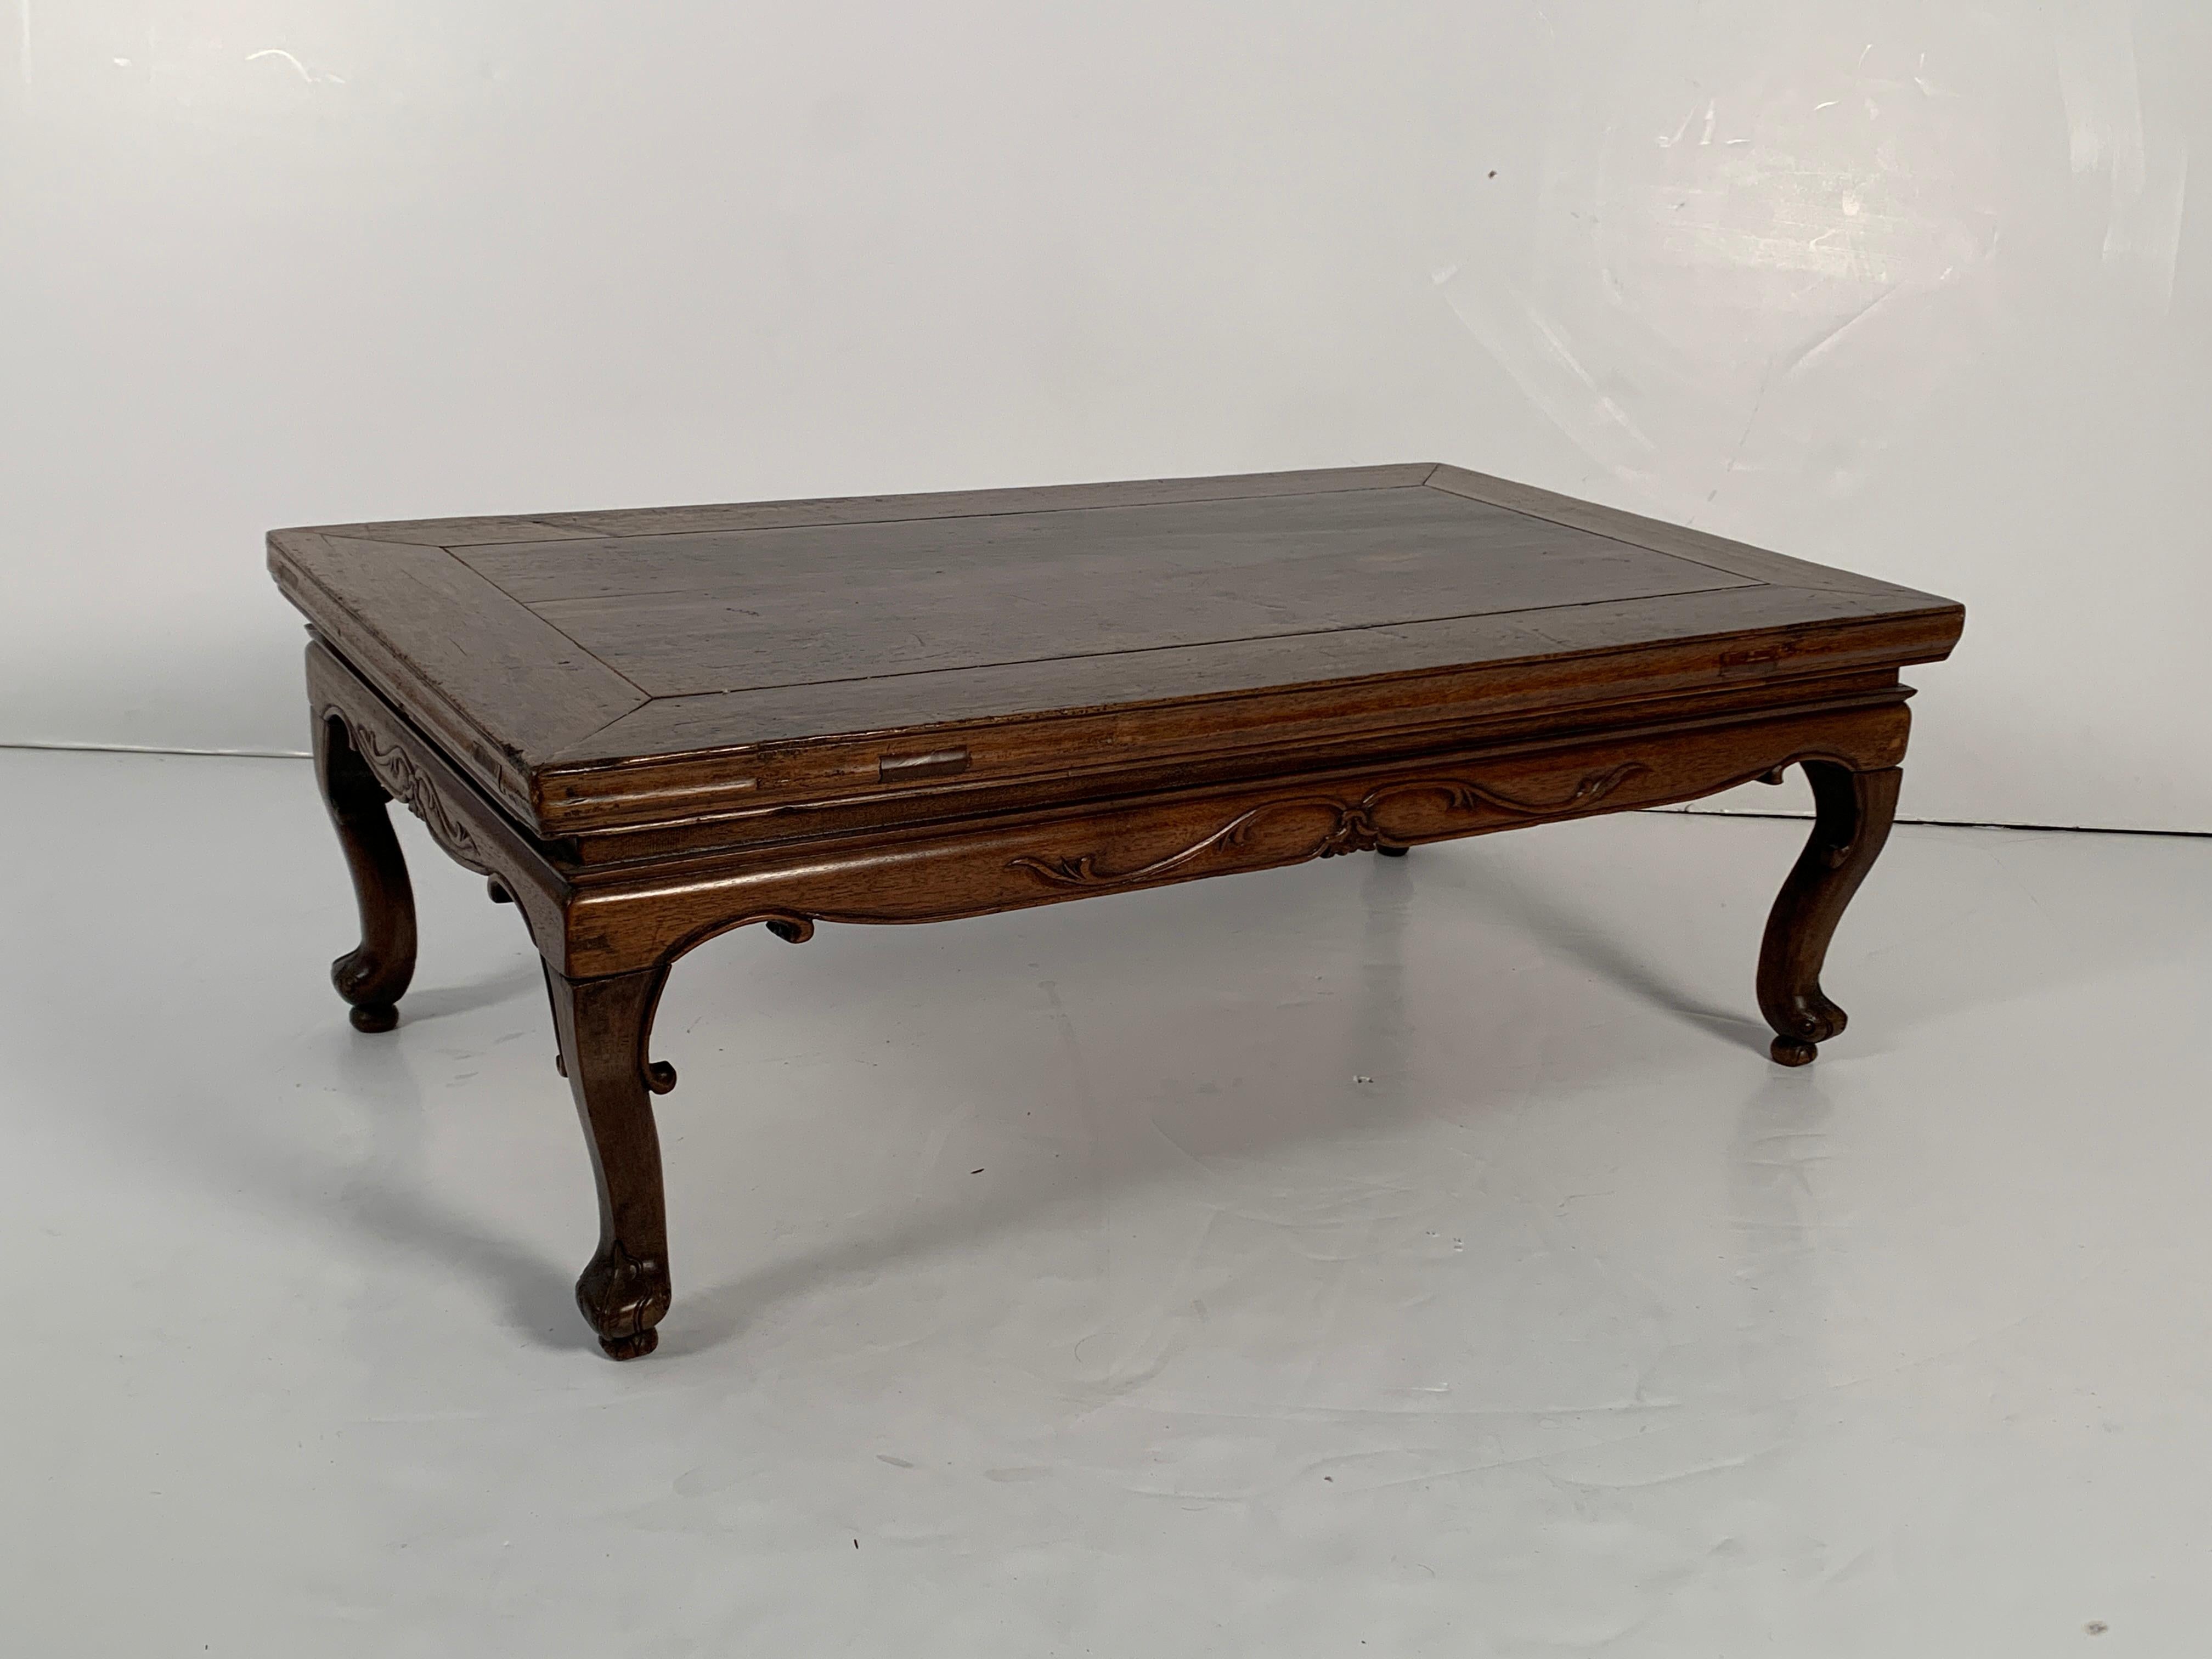 A very fine and rare Chinese Qing Dynasty walnut wood (hetao mu) kang table with folding legs, 17th to 18th century, China.

Crafted in walnut wood (hetao mu), this ingenious table is of typical kang form, with a rectangular framed top and solid